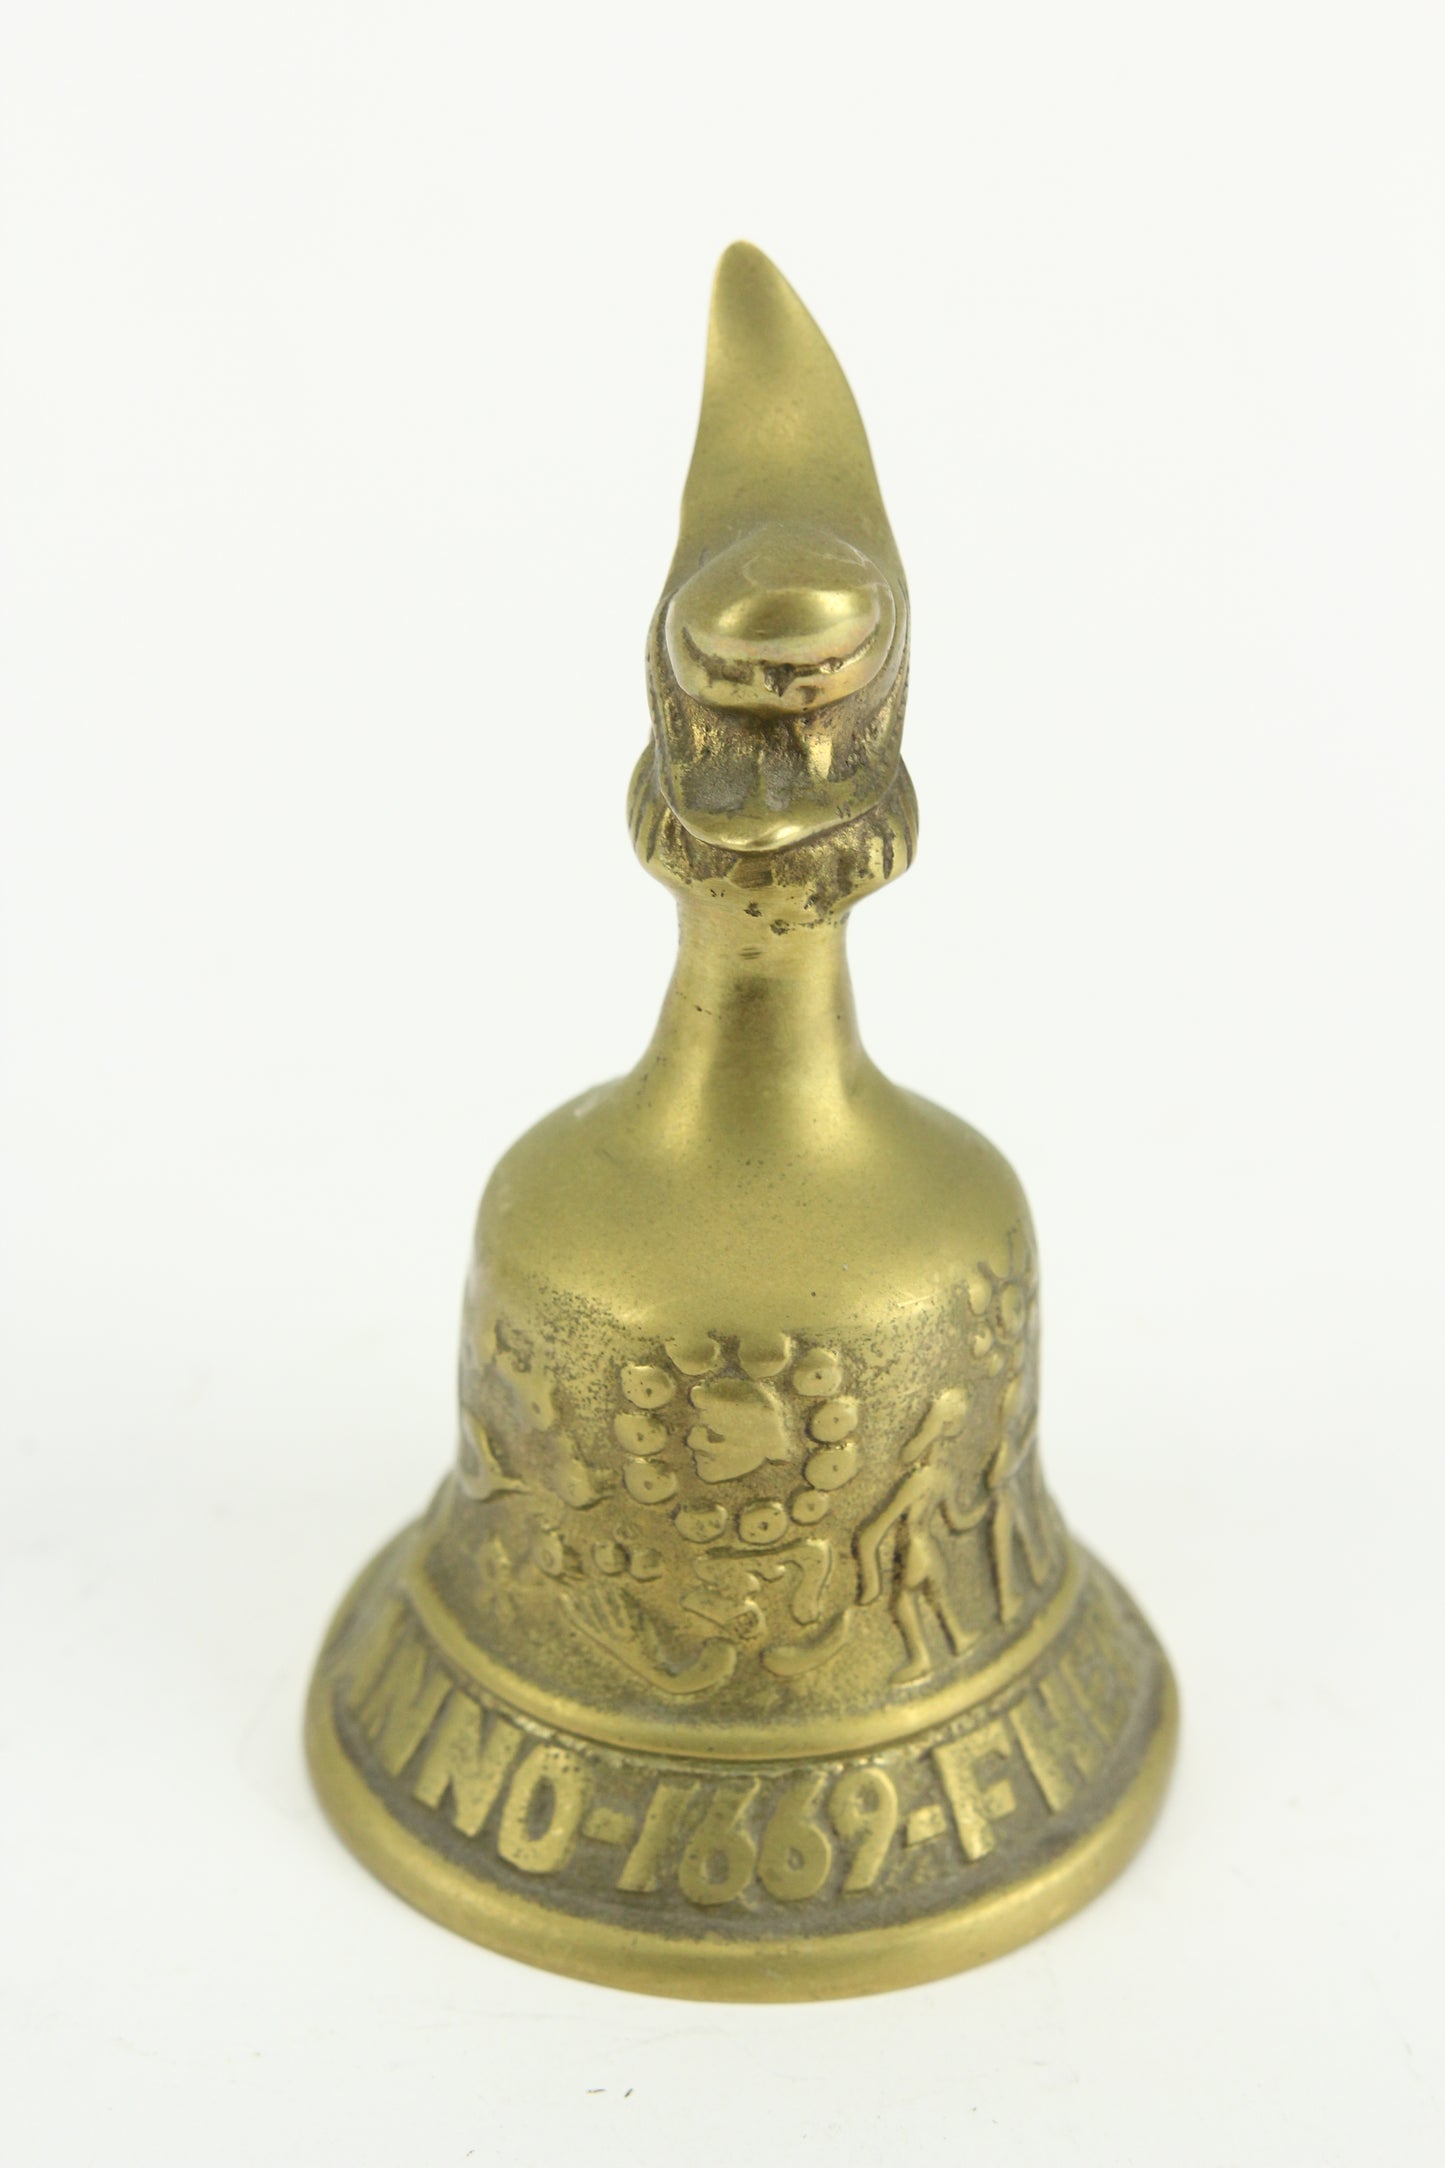 Replica French Pirate Cavalier Solid Brass Bell "FHEM-NY-ME-FEGIT ANNO 1669"